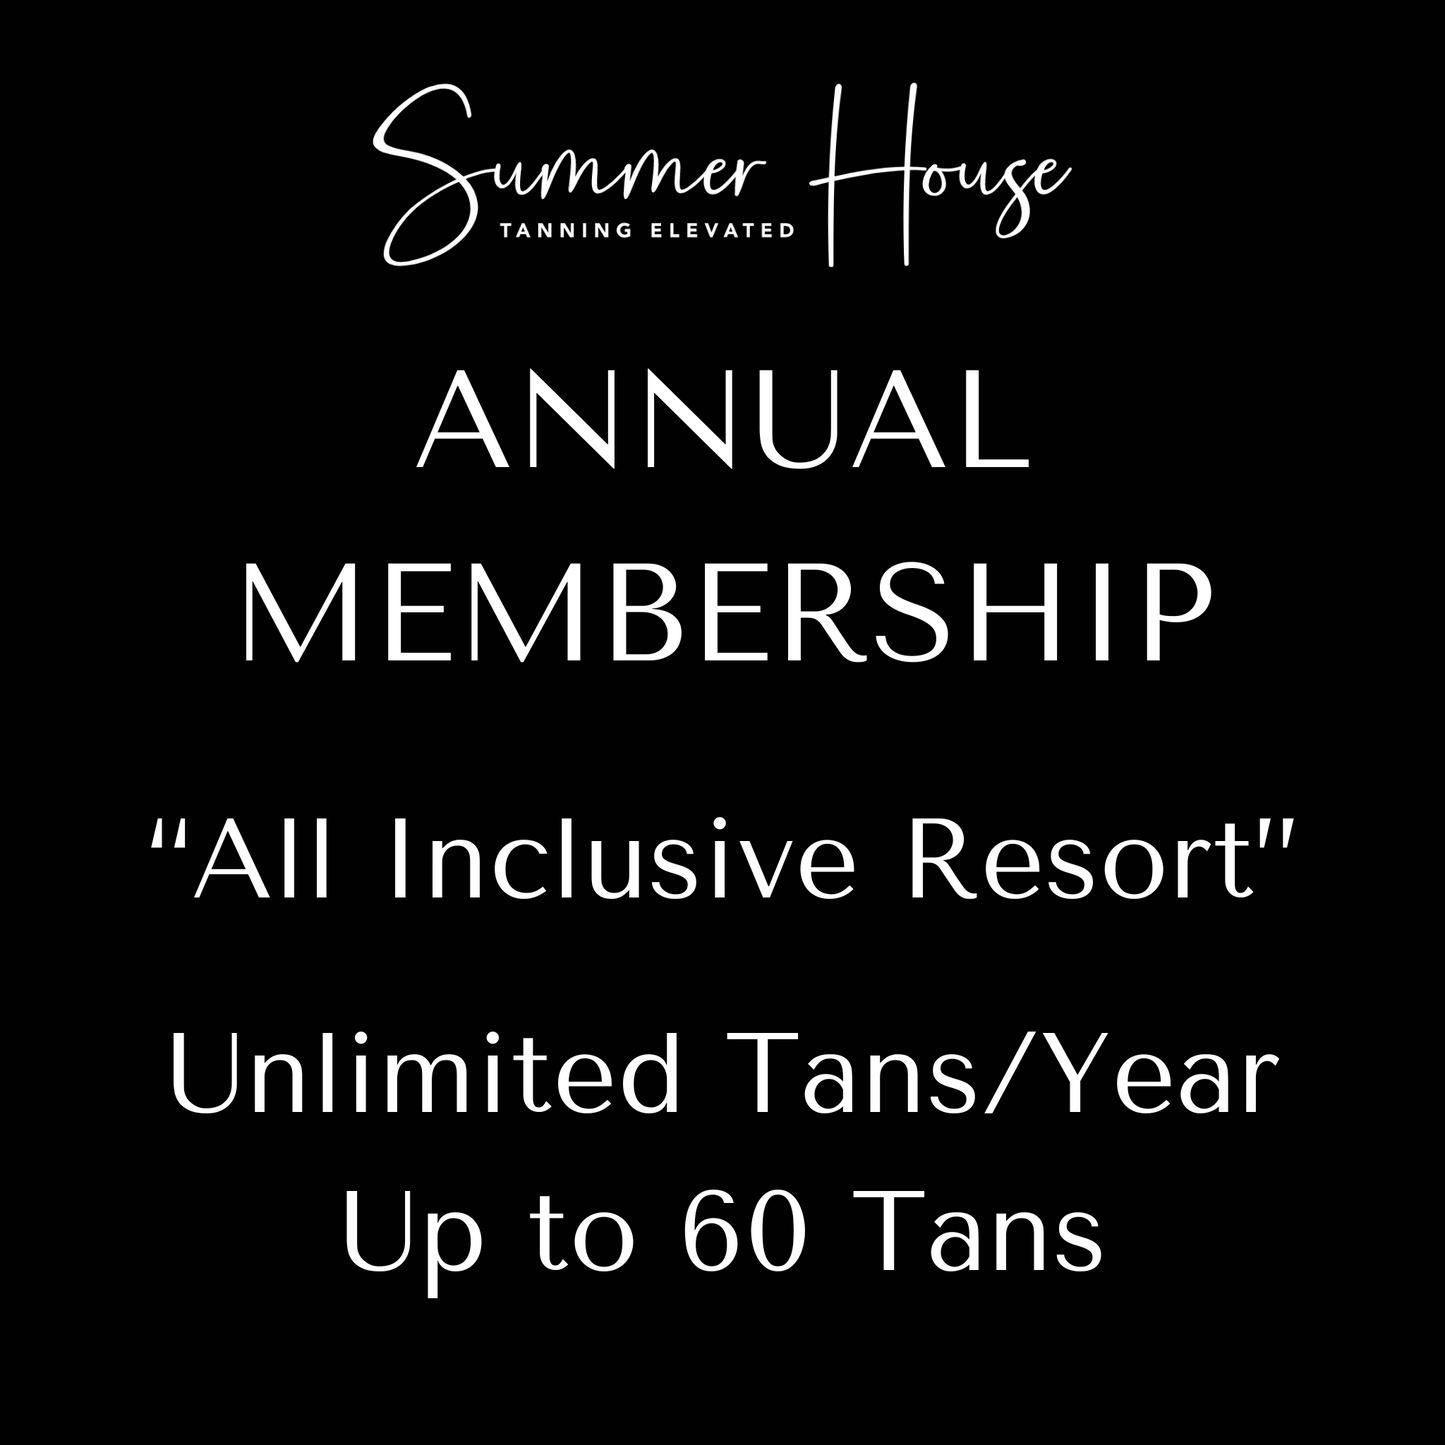 Annual Membership - Unlimited Tans For One Year - $1,995 Value